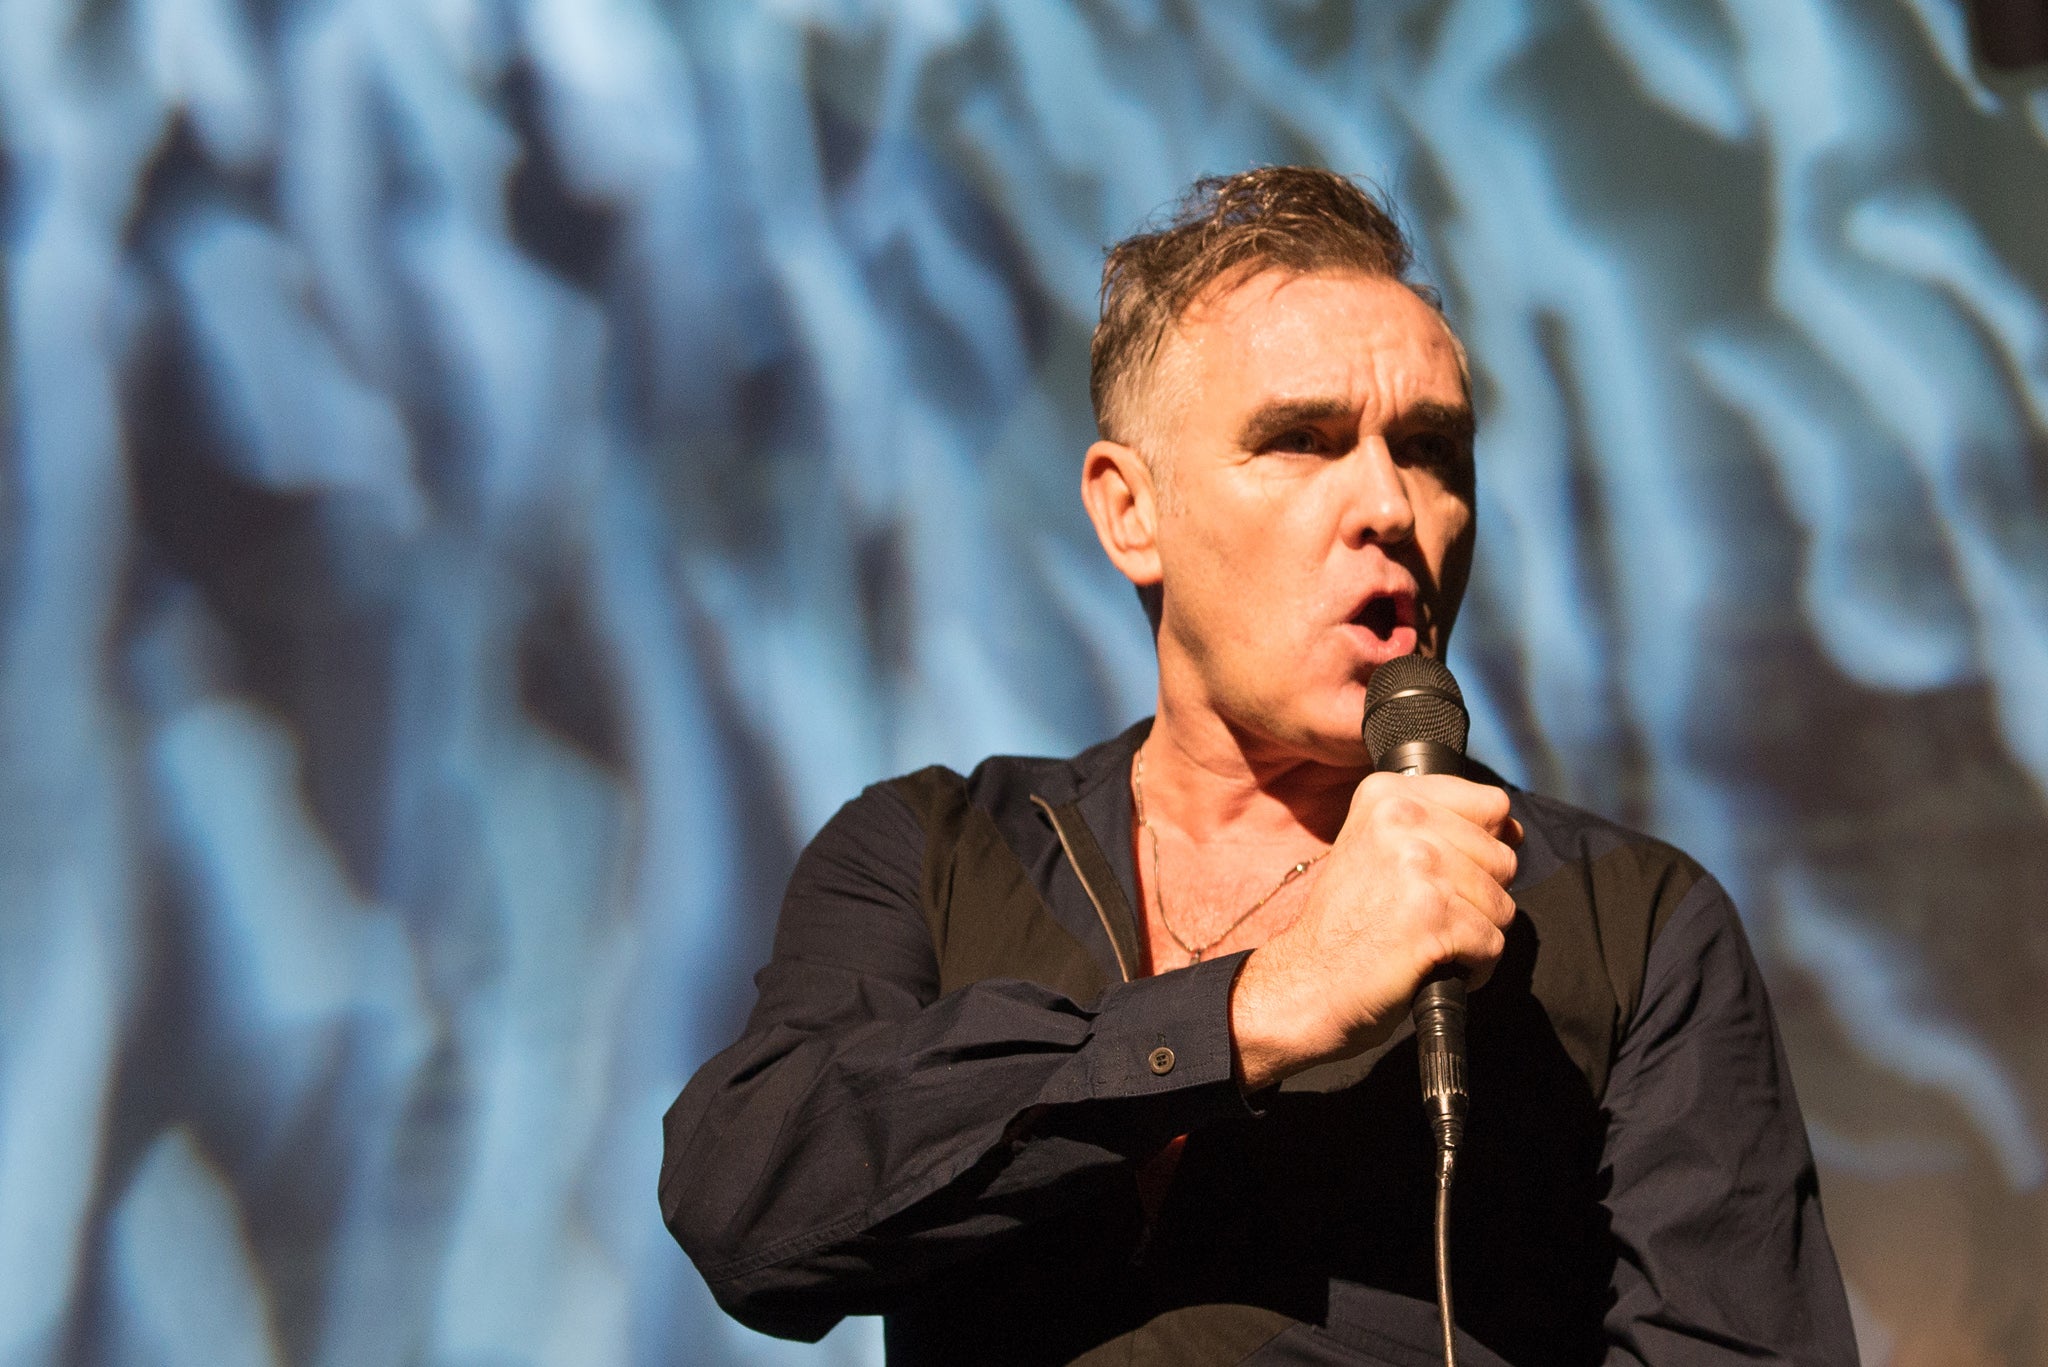 Morrissey is still suffering from a bleeding stomach ulcer and has had to cancel further shows